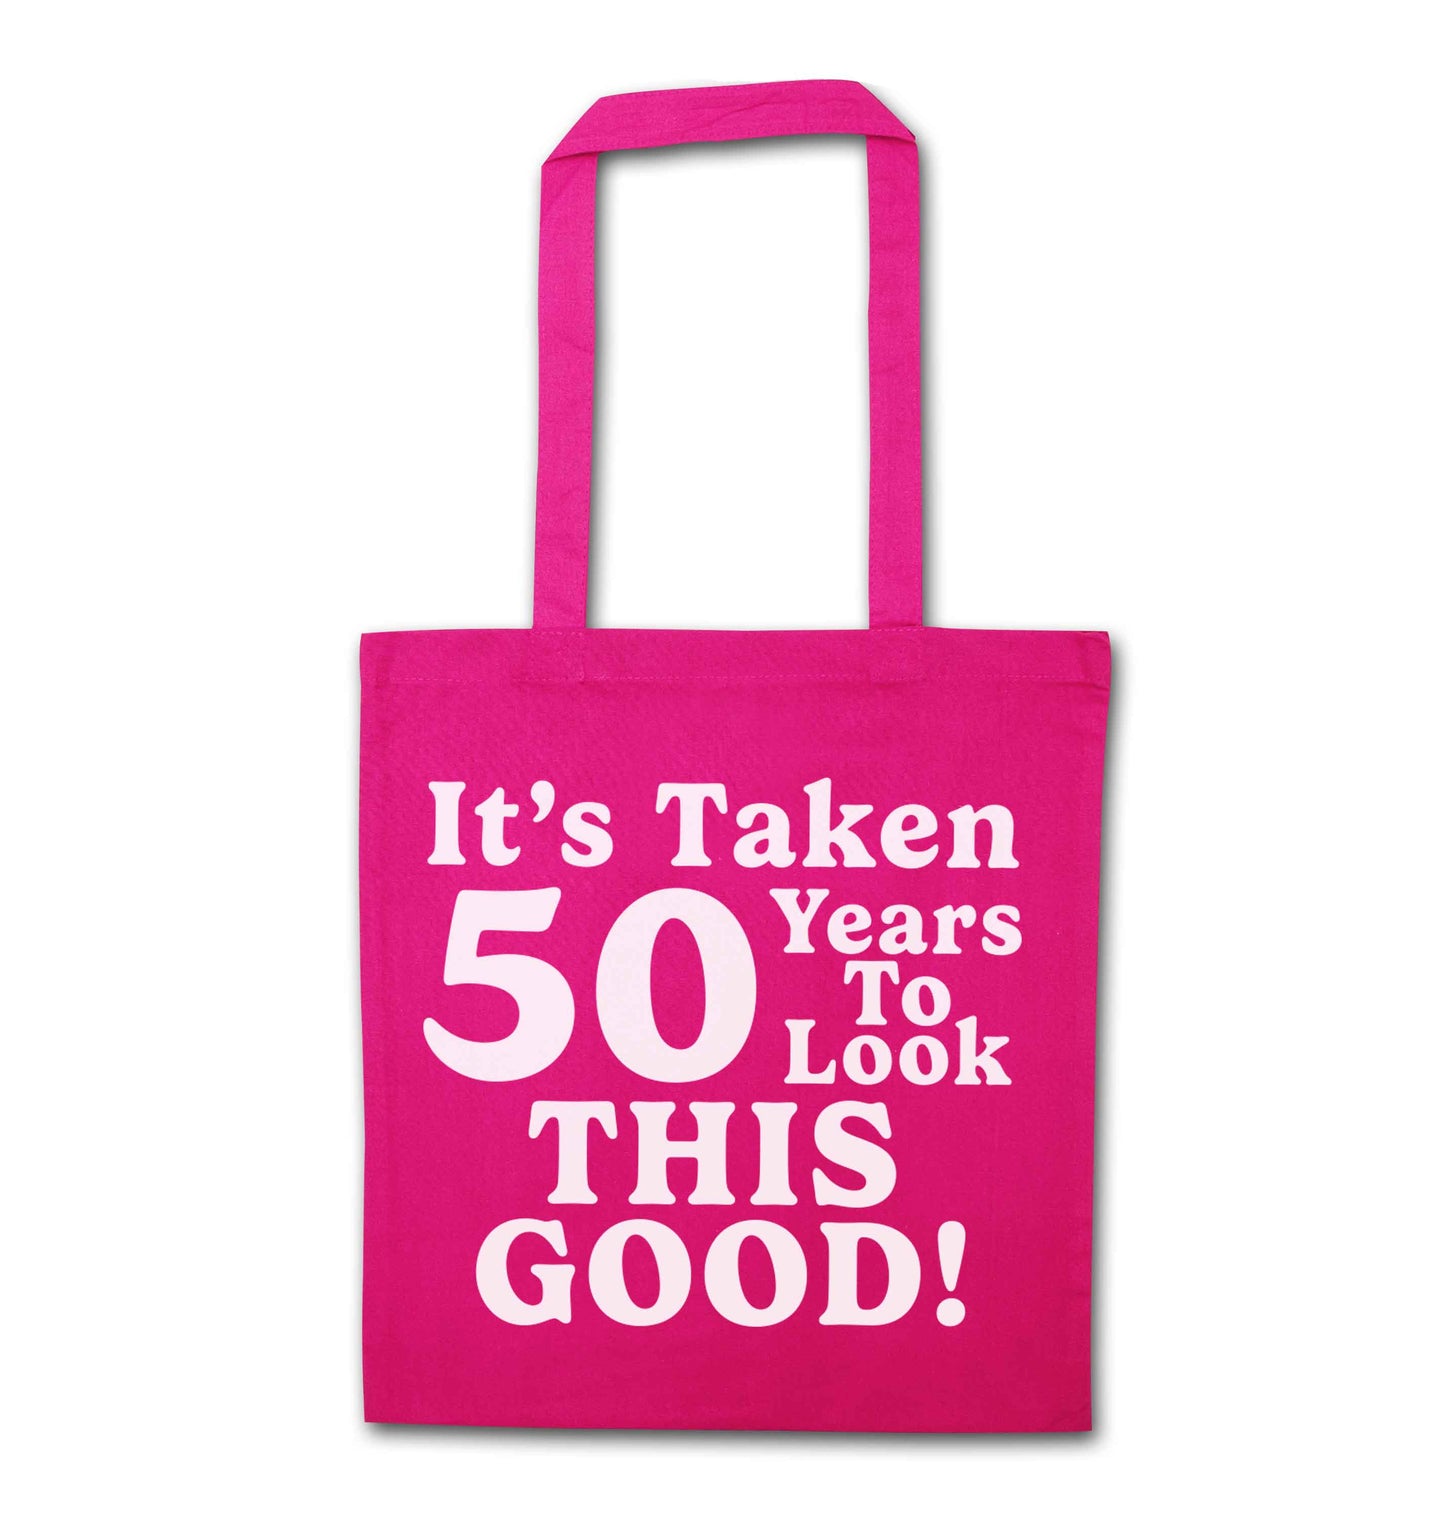 It's taken 50 years to look this good! pink tote bag